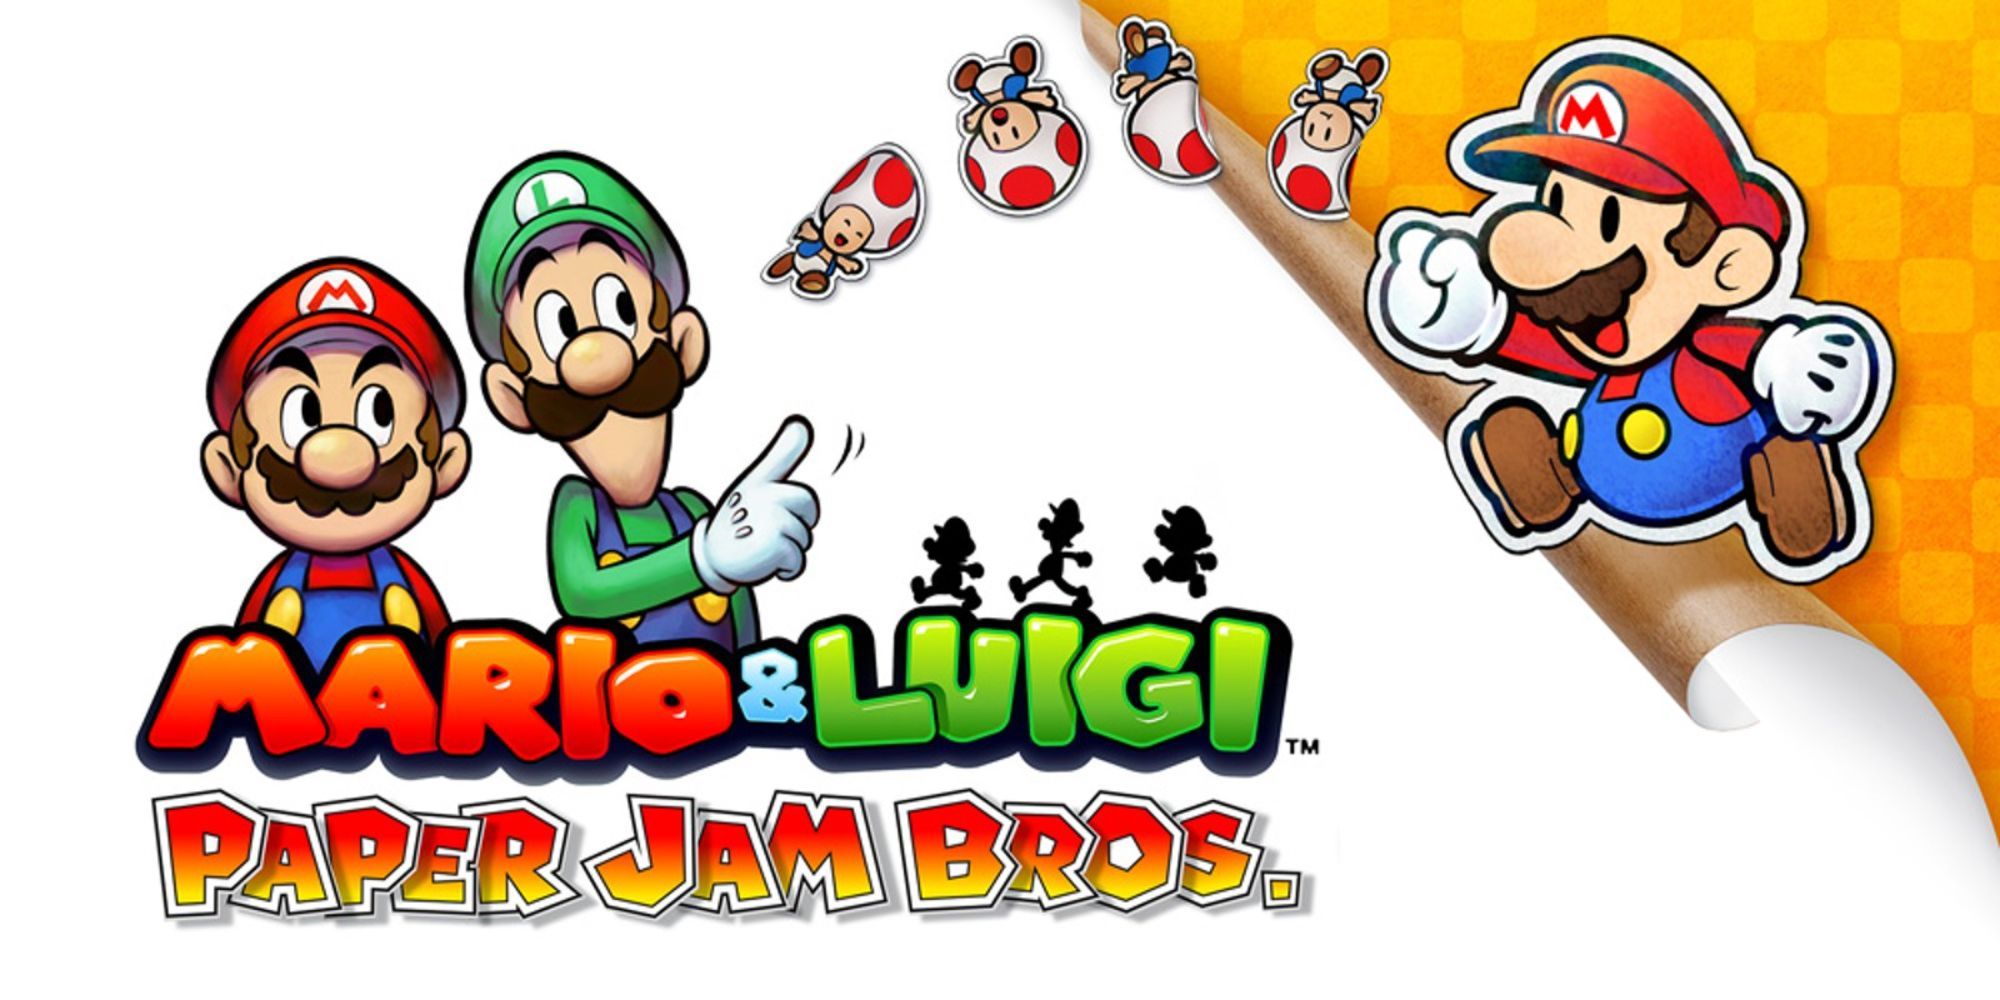 Mario stands next to Luigi who is pointing at several Toads in promotional art for Mario & Luigi Paper Jam